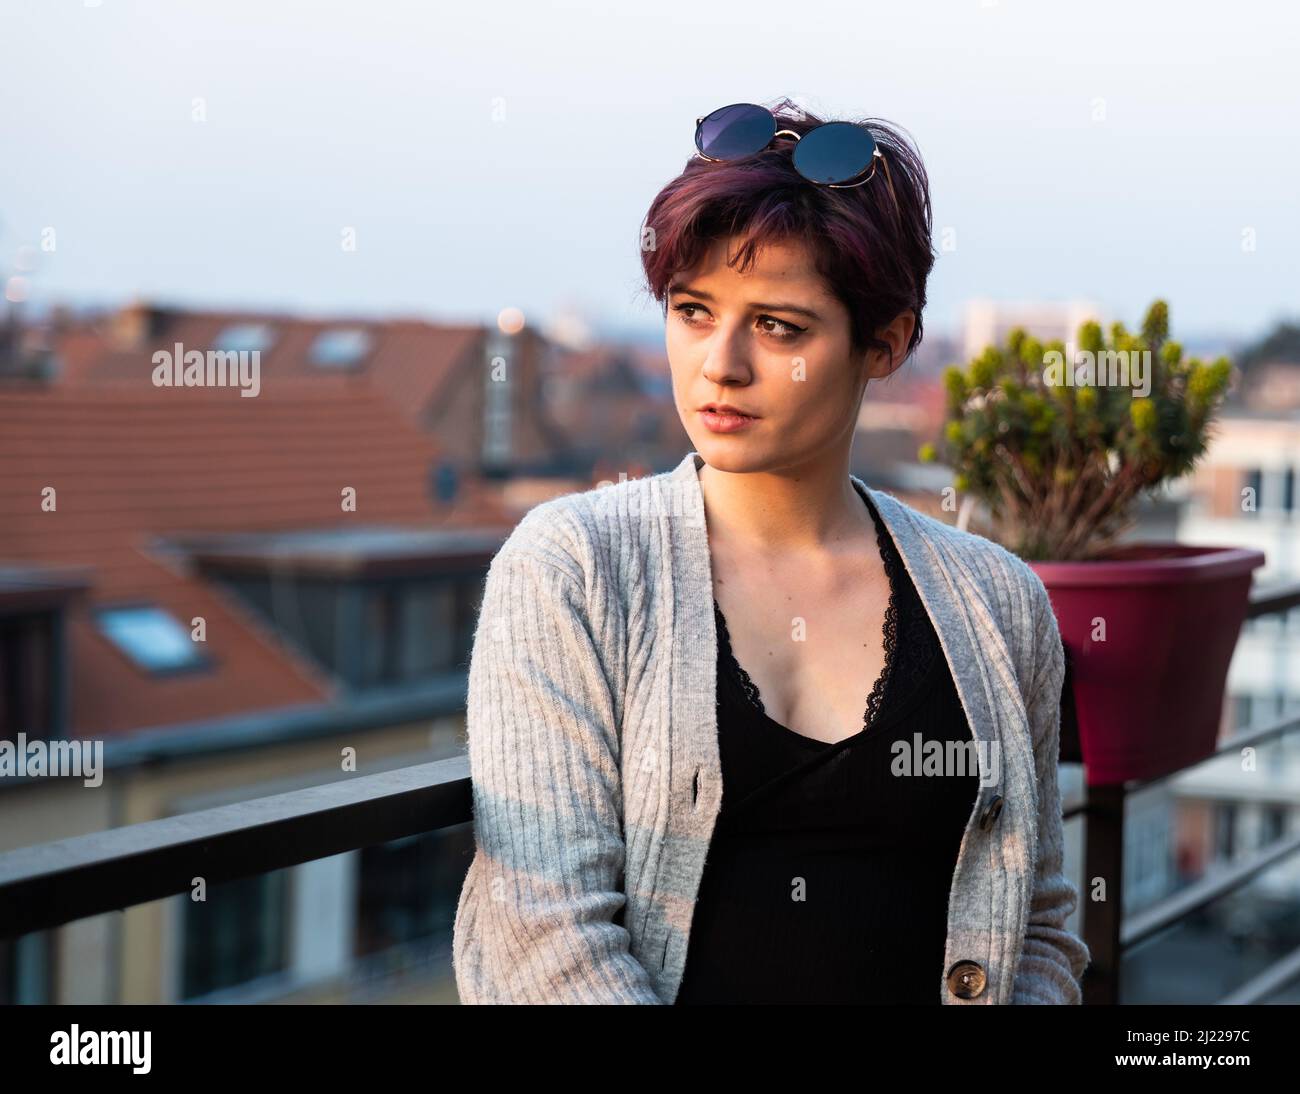 Fashion portrait of a 23 year old white woman with short, dyed hair standing on a terrace, Brussels, Belgium Stock Photo